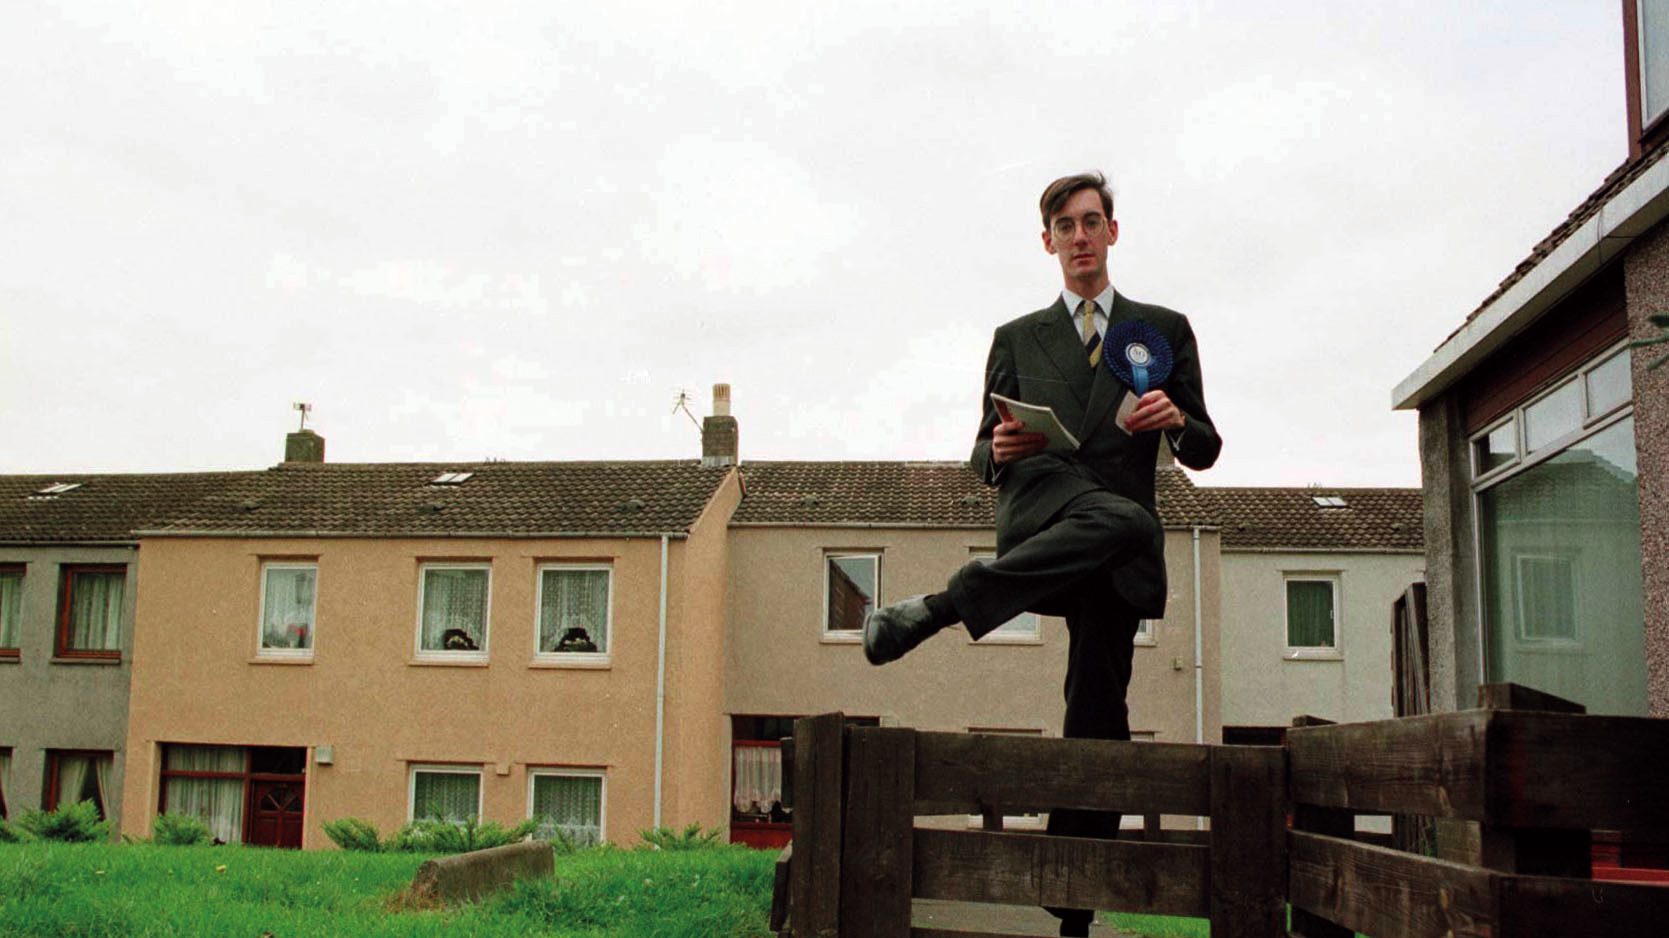 Jacob Rees-Mogg campaigning on a 
housing estate in Groban, Leven, in 
the Labour seat of Central Fife in the 
1997 general election. Photo: Colin McPherson/Corbis/
Getty